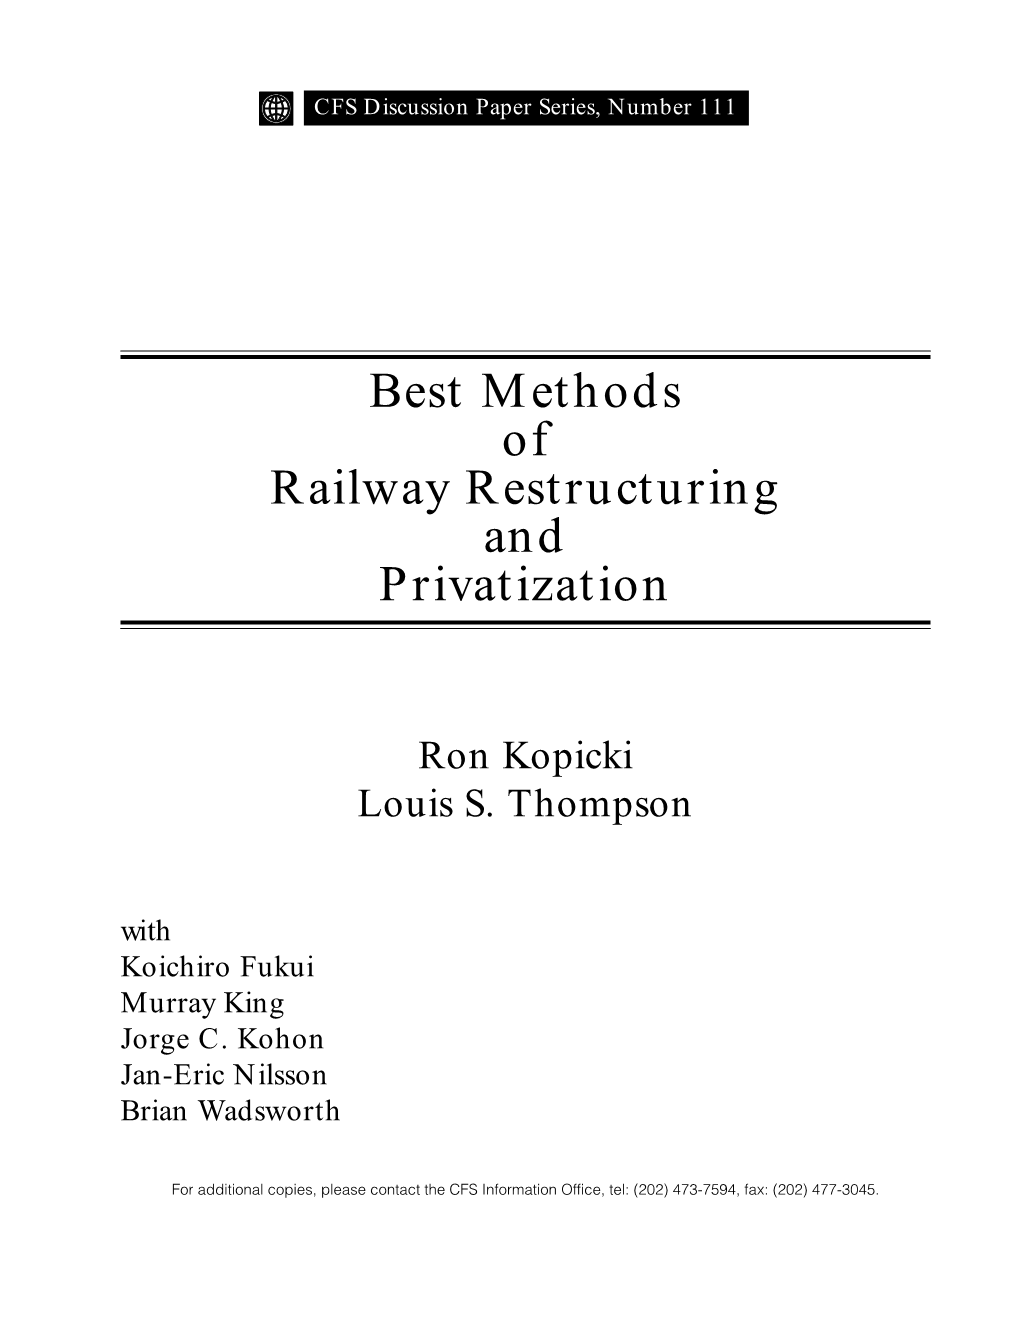 Best Methods of Railway Restructuring and Privatization